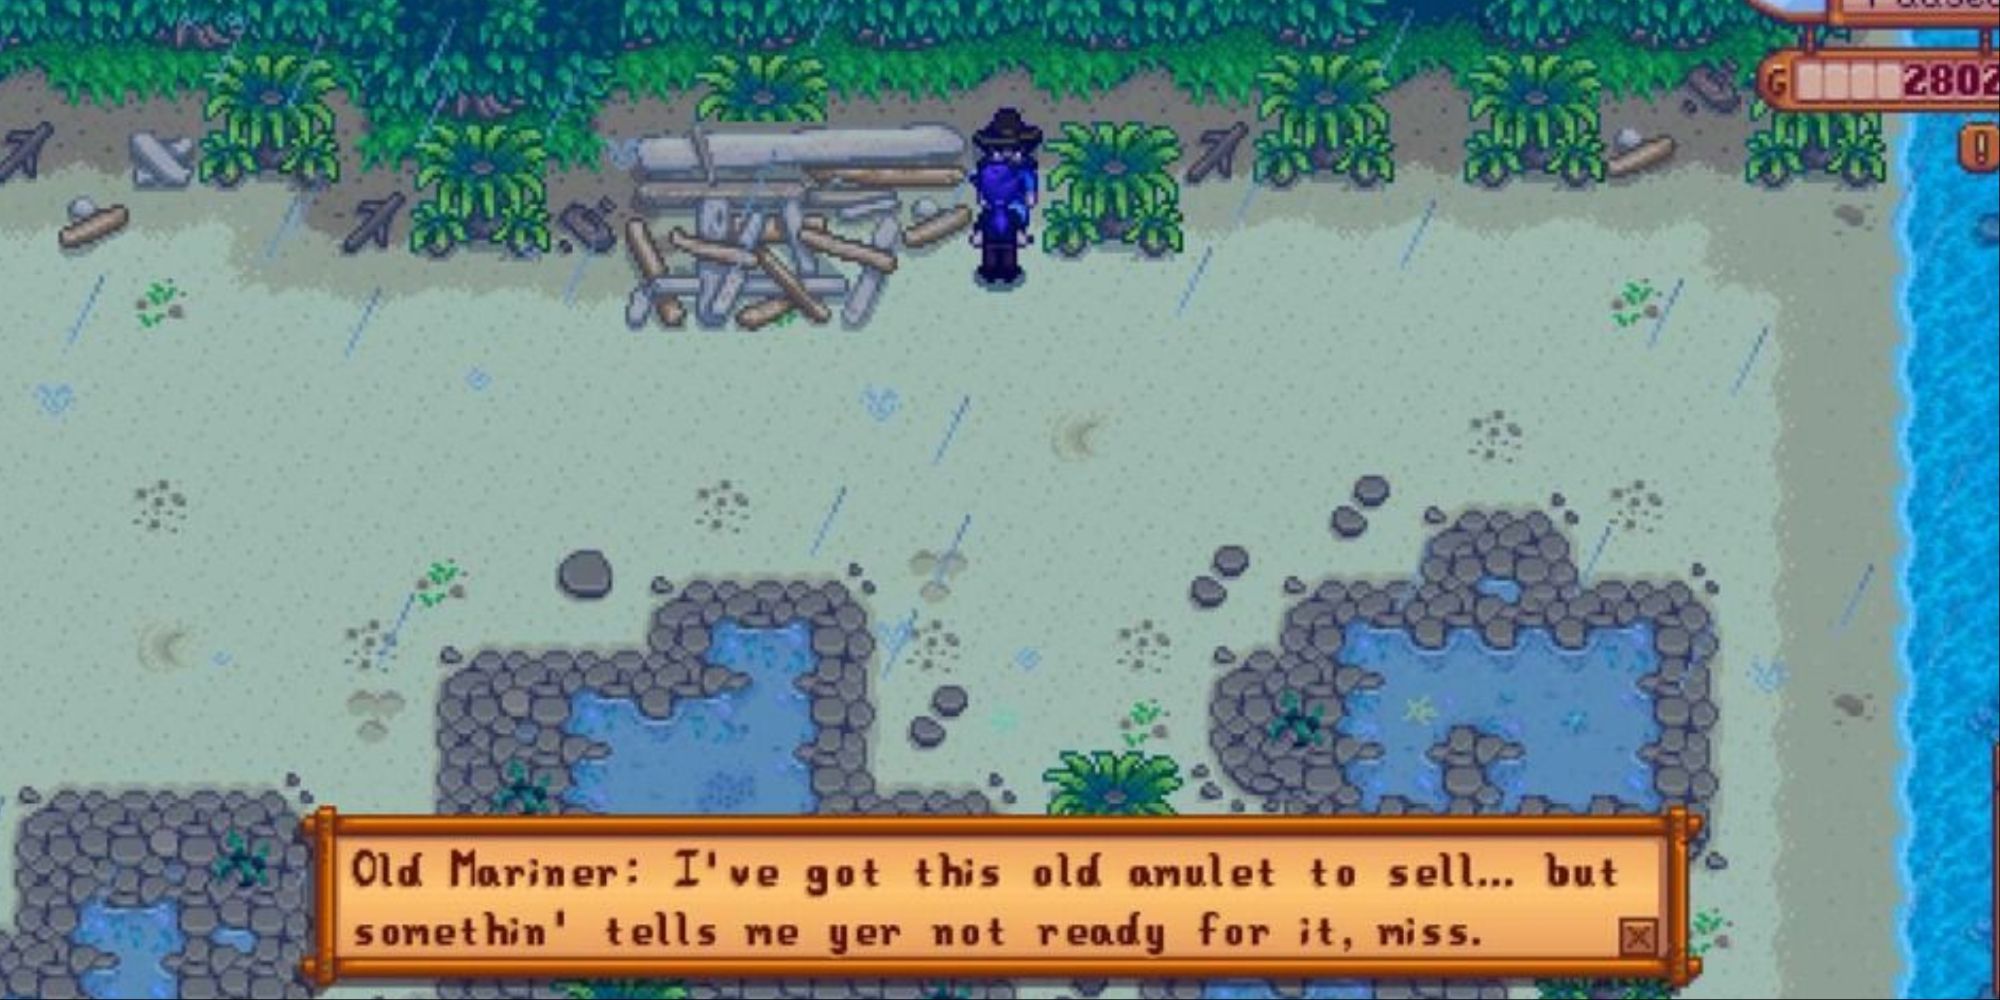 Stardew Valley - Talking to the Old mariner